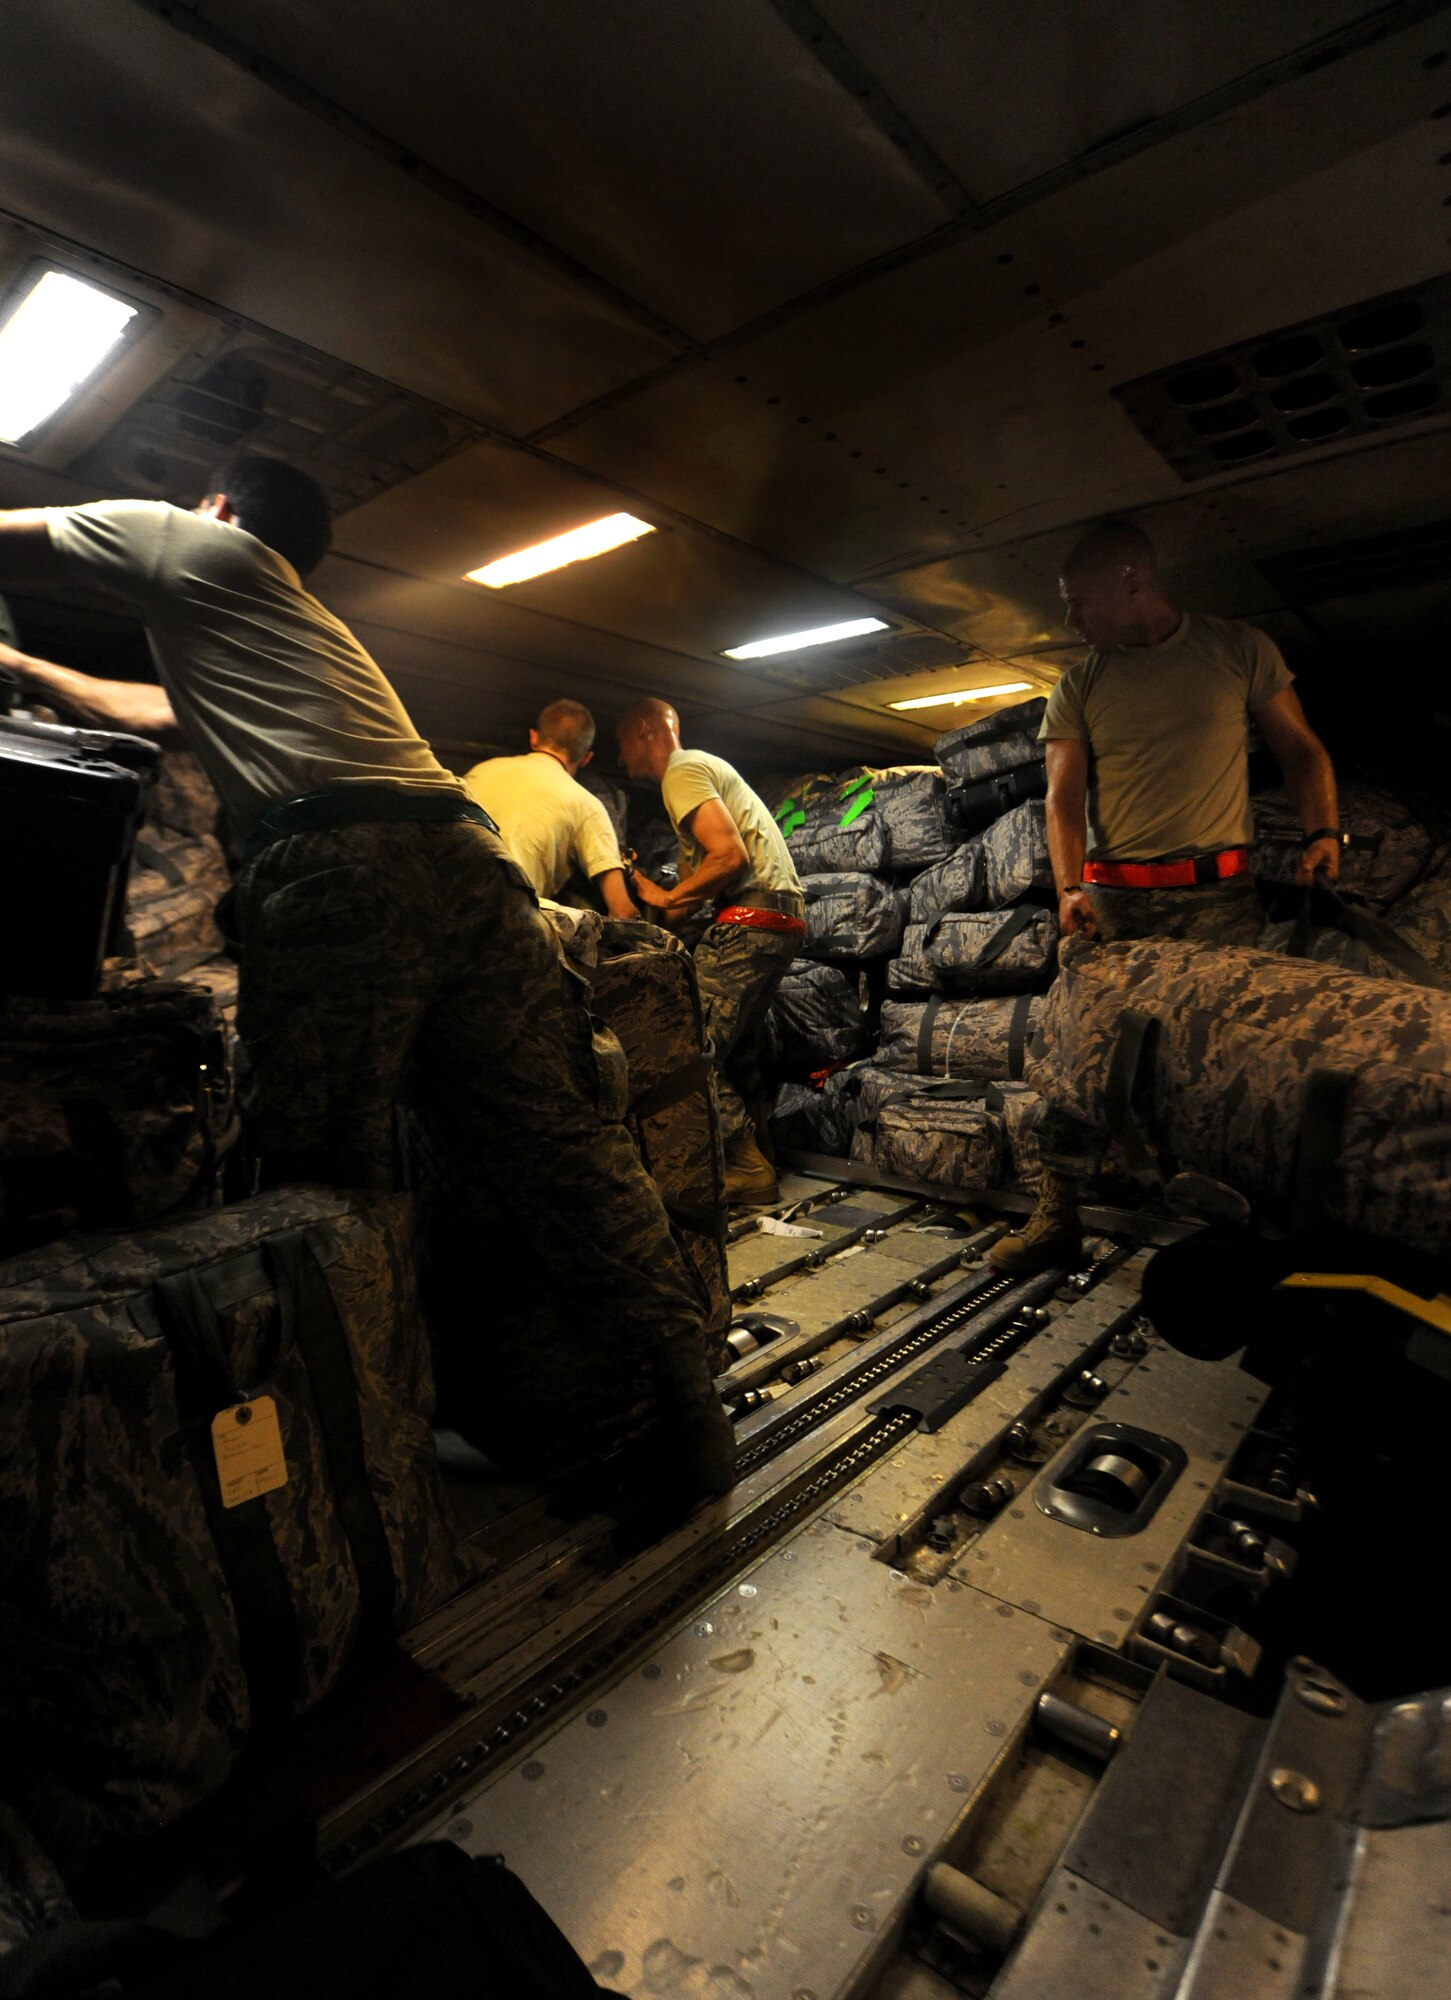 MOODY AIR FORCE BASE, Ga. -- Members from different squadrons around Moody load gear onto a commercial flight here. The members from the 23rd Aircraft Maintenance Unit loaded their own equipment before boarding the aircraft. (U.S. Air Force photo/Airman 1st Class Benjamin Wiseman)



